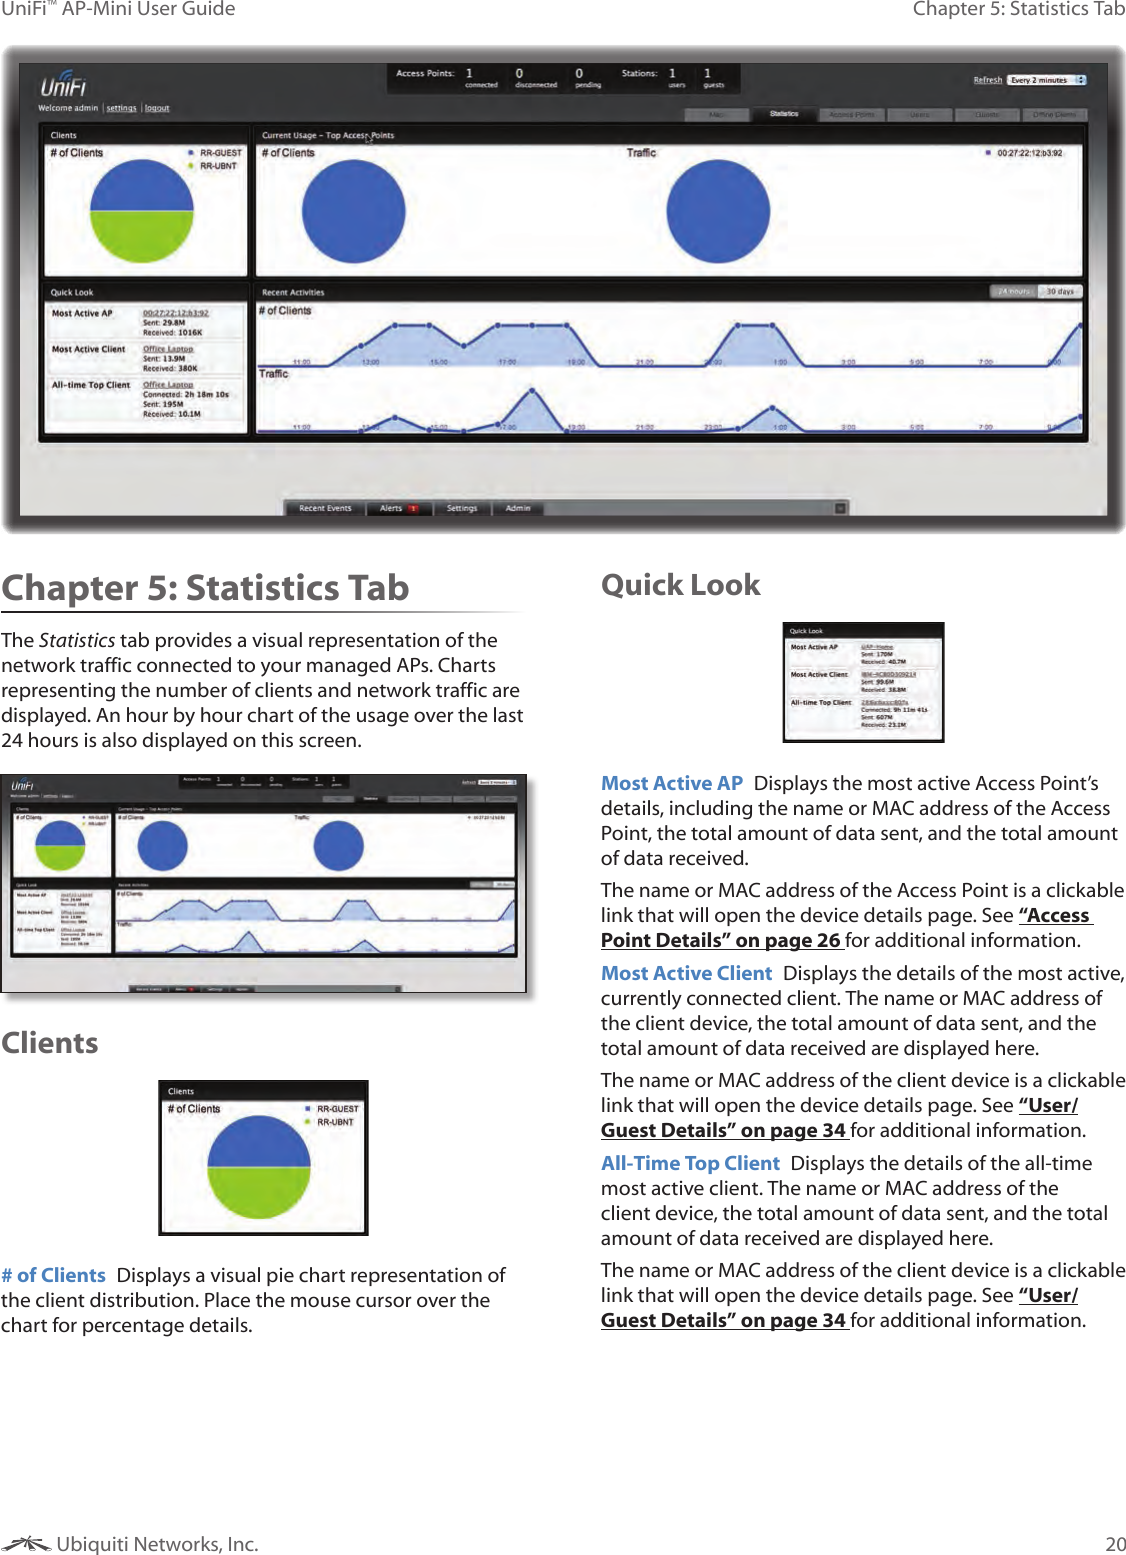 20Chapter 5: Statistics TabUniFi™ AP-Mini User Guide Ubiquiti Networks, Inc.Chapter 5: Statistics TabThe Statistics tab provides a visual representation of the network traffic connected to your managed APs. Charts representing the number of clients and network traffic are displayed. An hour by hour chart of the usage over the last 24 hours is also displayed on this screen.Clients# of Clients  Displays a visual pie chart representation of the client distribution. Place the mouse cursor over the chart for percentage details.Quick LookMost Active AP  Displays the most active Access Point’s details, including the name or MAC address of the Access Point, the total amount of data sent, and the total amount of data received. The name or MAC address of the Access Point is a clickable link that will open the device details page. See “Access Point Details” on page 26 for additional information.Most Active Client  Displays the details of the most active, currently connected client. The name or MAC address of the client device, the total amount of data sent, and the total amount of data received are displayed here. The name or MAC address of the client device is a clickable link that will open the device details page. See “User/Guest Details” on page 34 for additional information.All-Time Top Client  Displays the details of the all-time most active client. The name or MAC address of the client device, the total amount of data sent, and the total amount of data received are displayed here. The name or MAC address of the client device is a clickable link that will open the device details page. See “User/Guest Details” on page 34 for additional information.